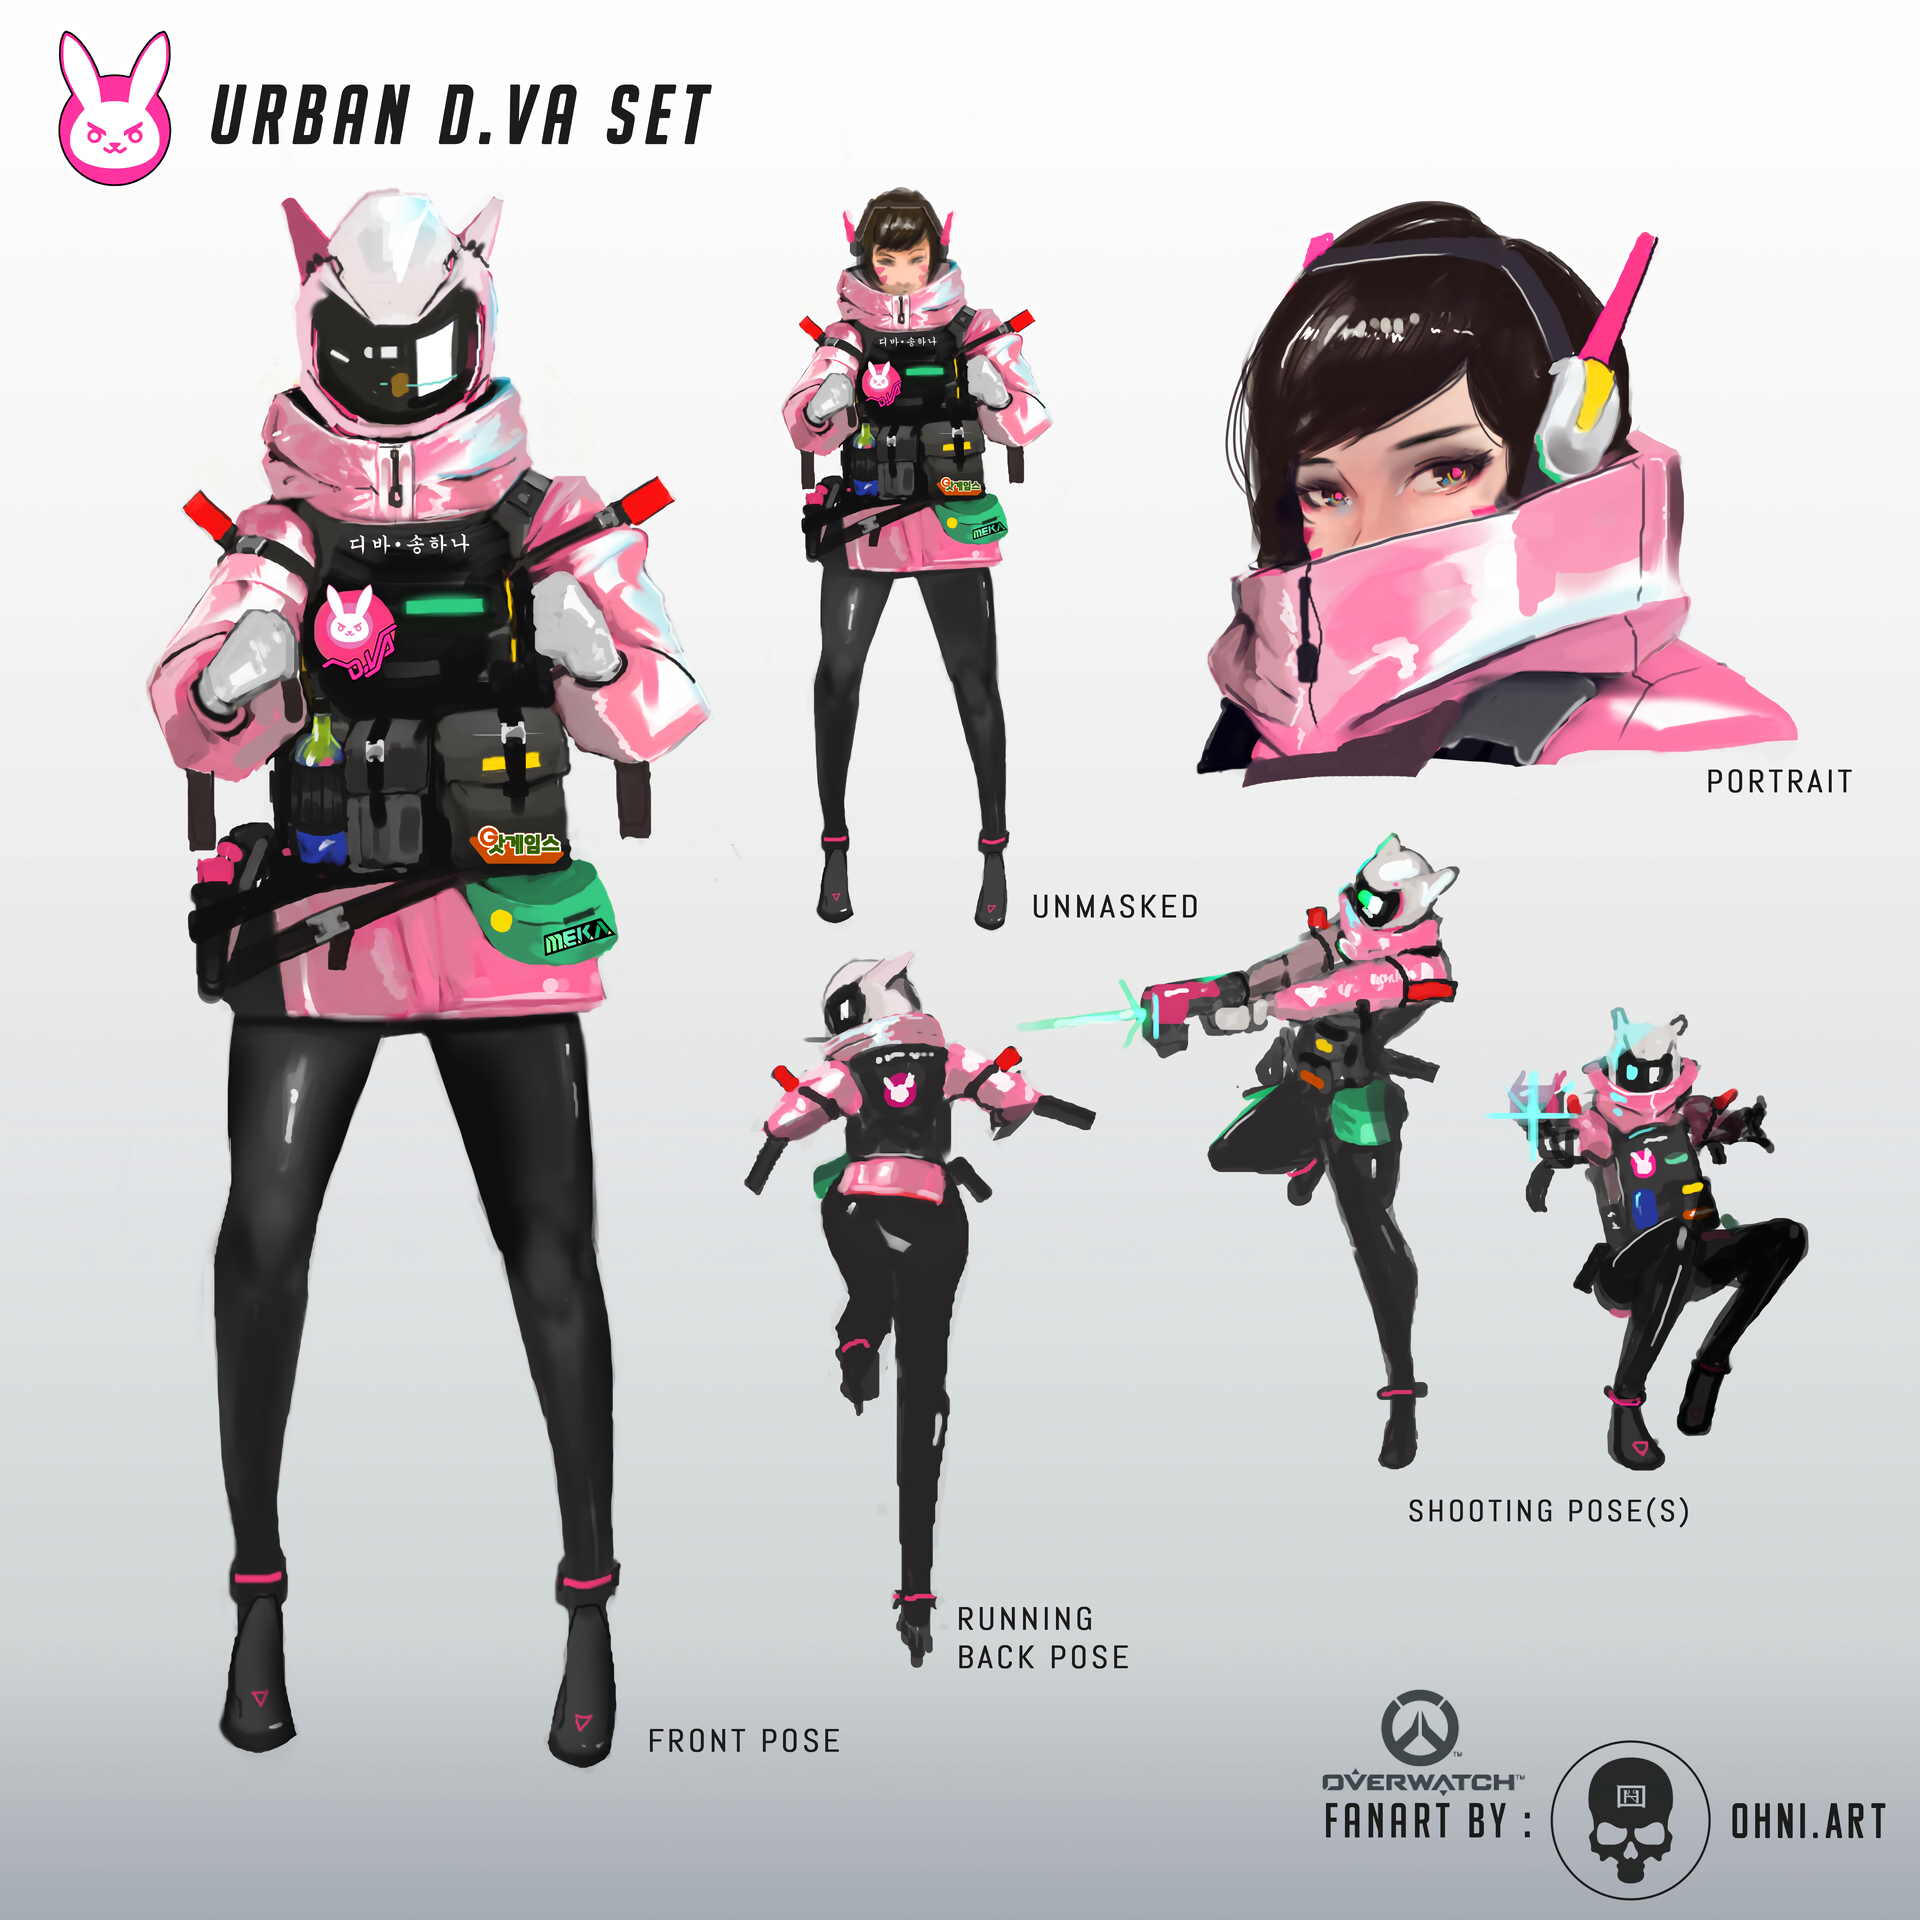 Naeri X 나에리 on X: Overwatch Police Tracer Skin Concept 🚨 This